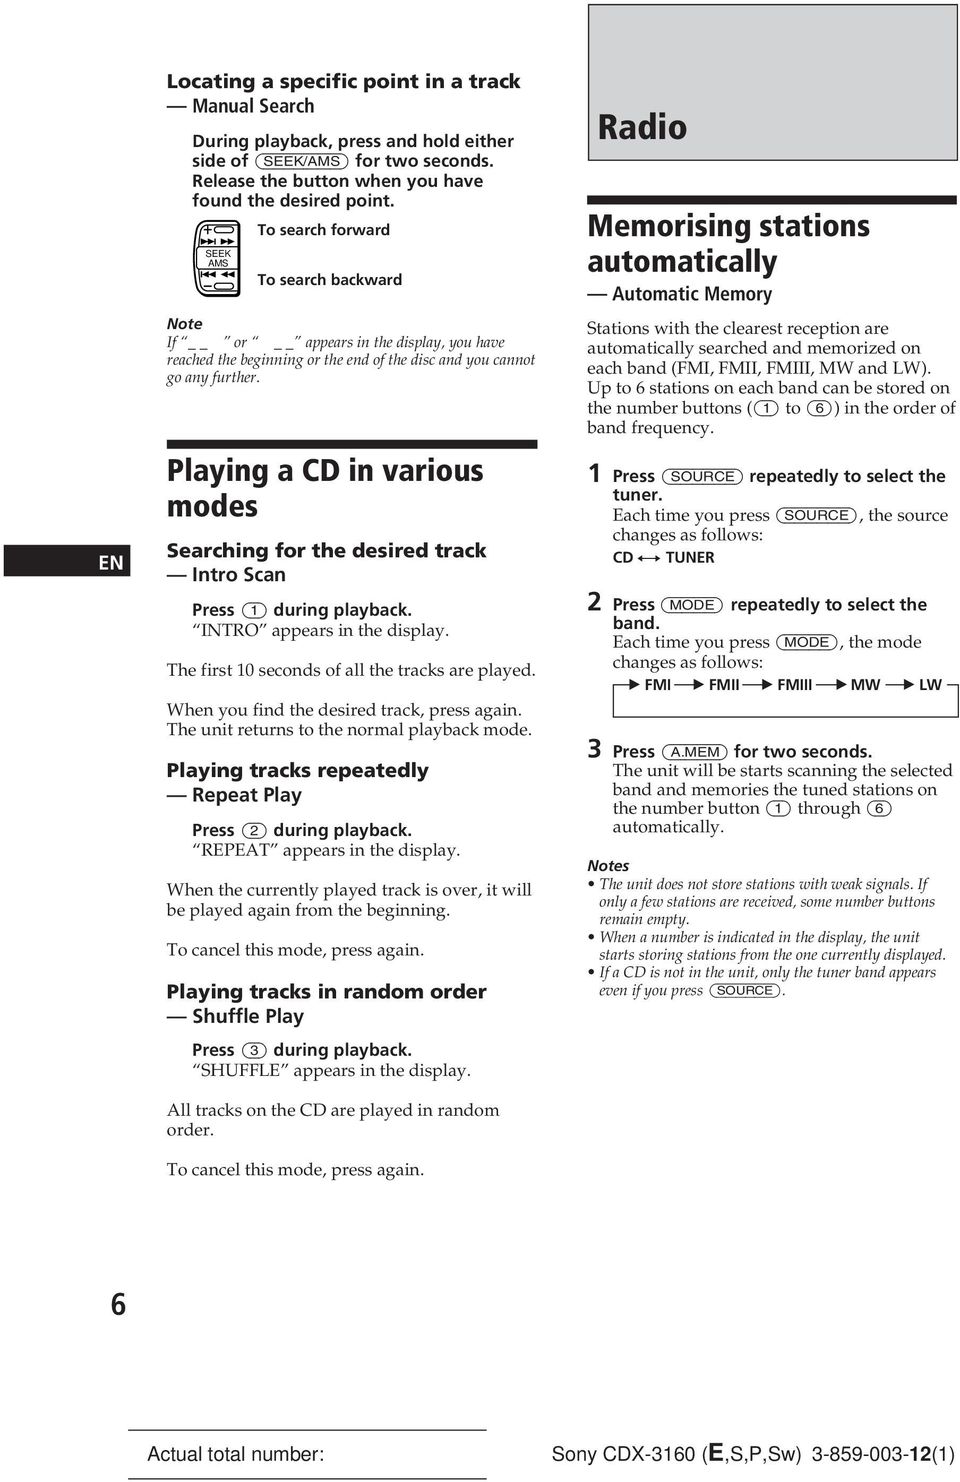 Playing a CD in various modes Searching for the desired track Intro Scan Press (1) during playback. INTRO appears in the display. The first 10 seconds of all the tracks are played.